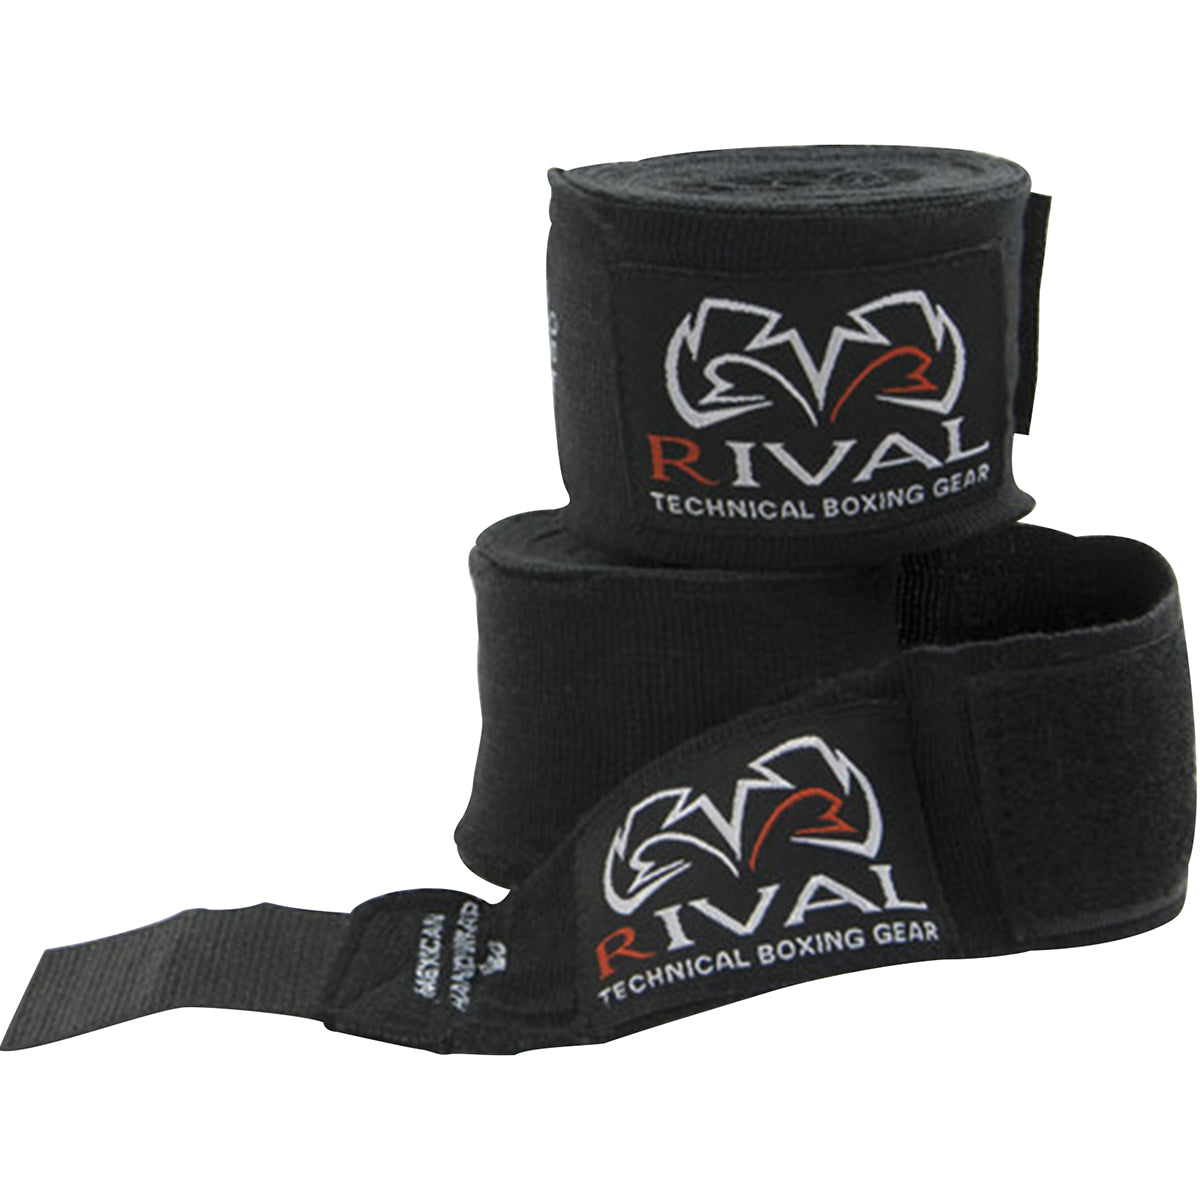 RIVAL Boxing Mexican Style Handwraps RIVAL